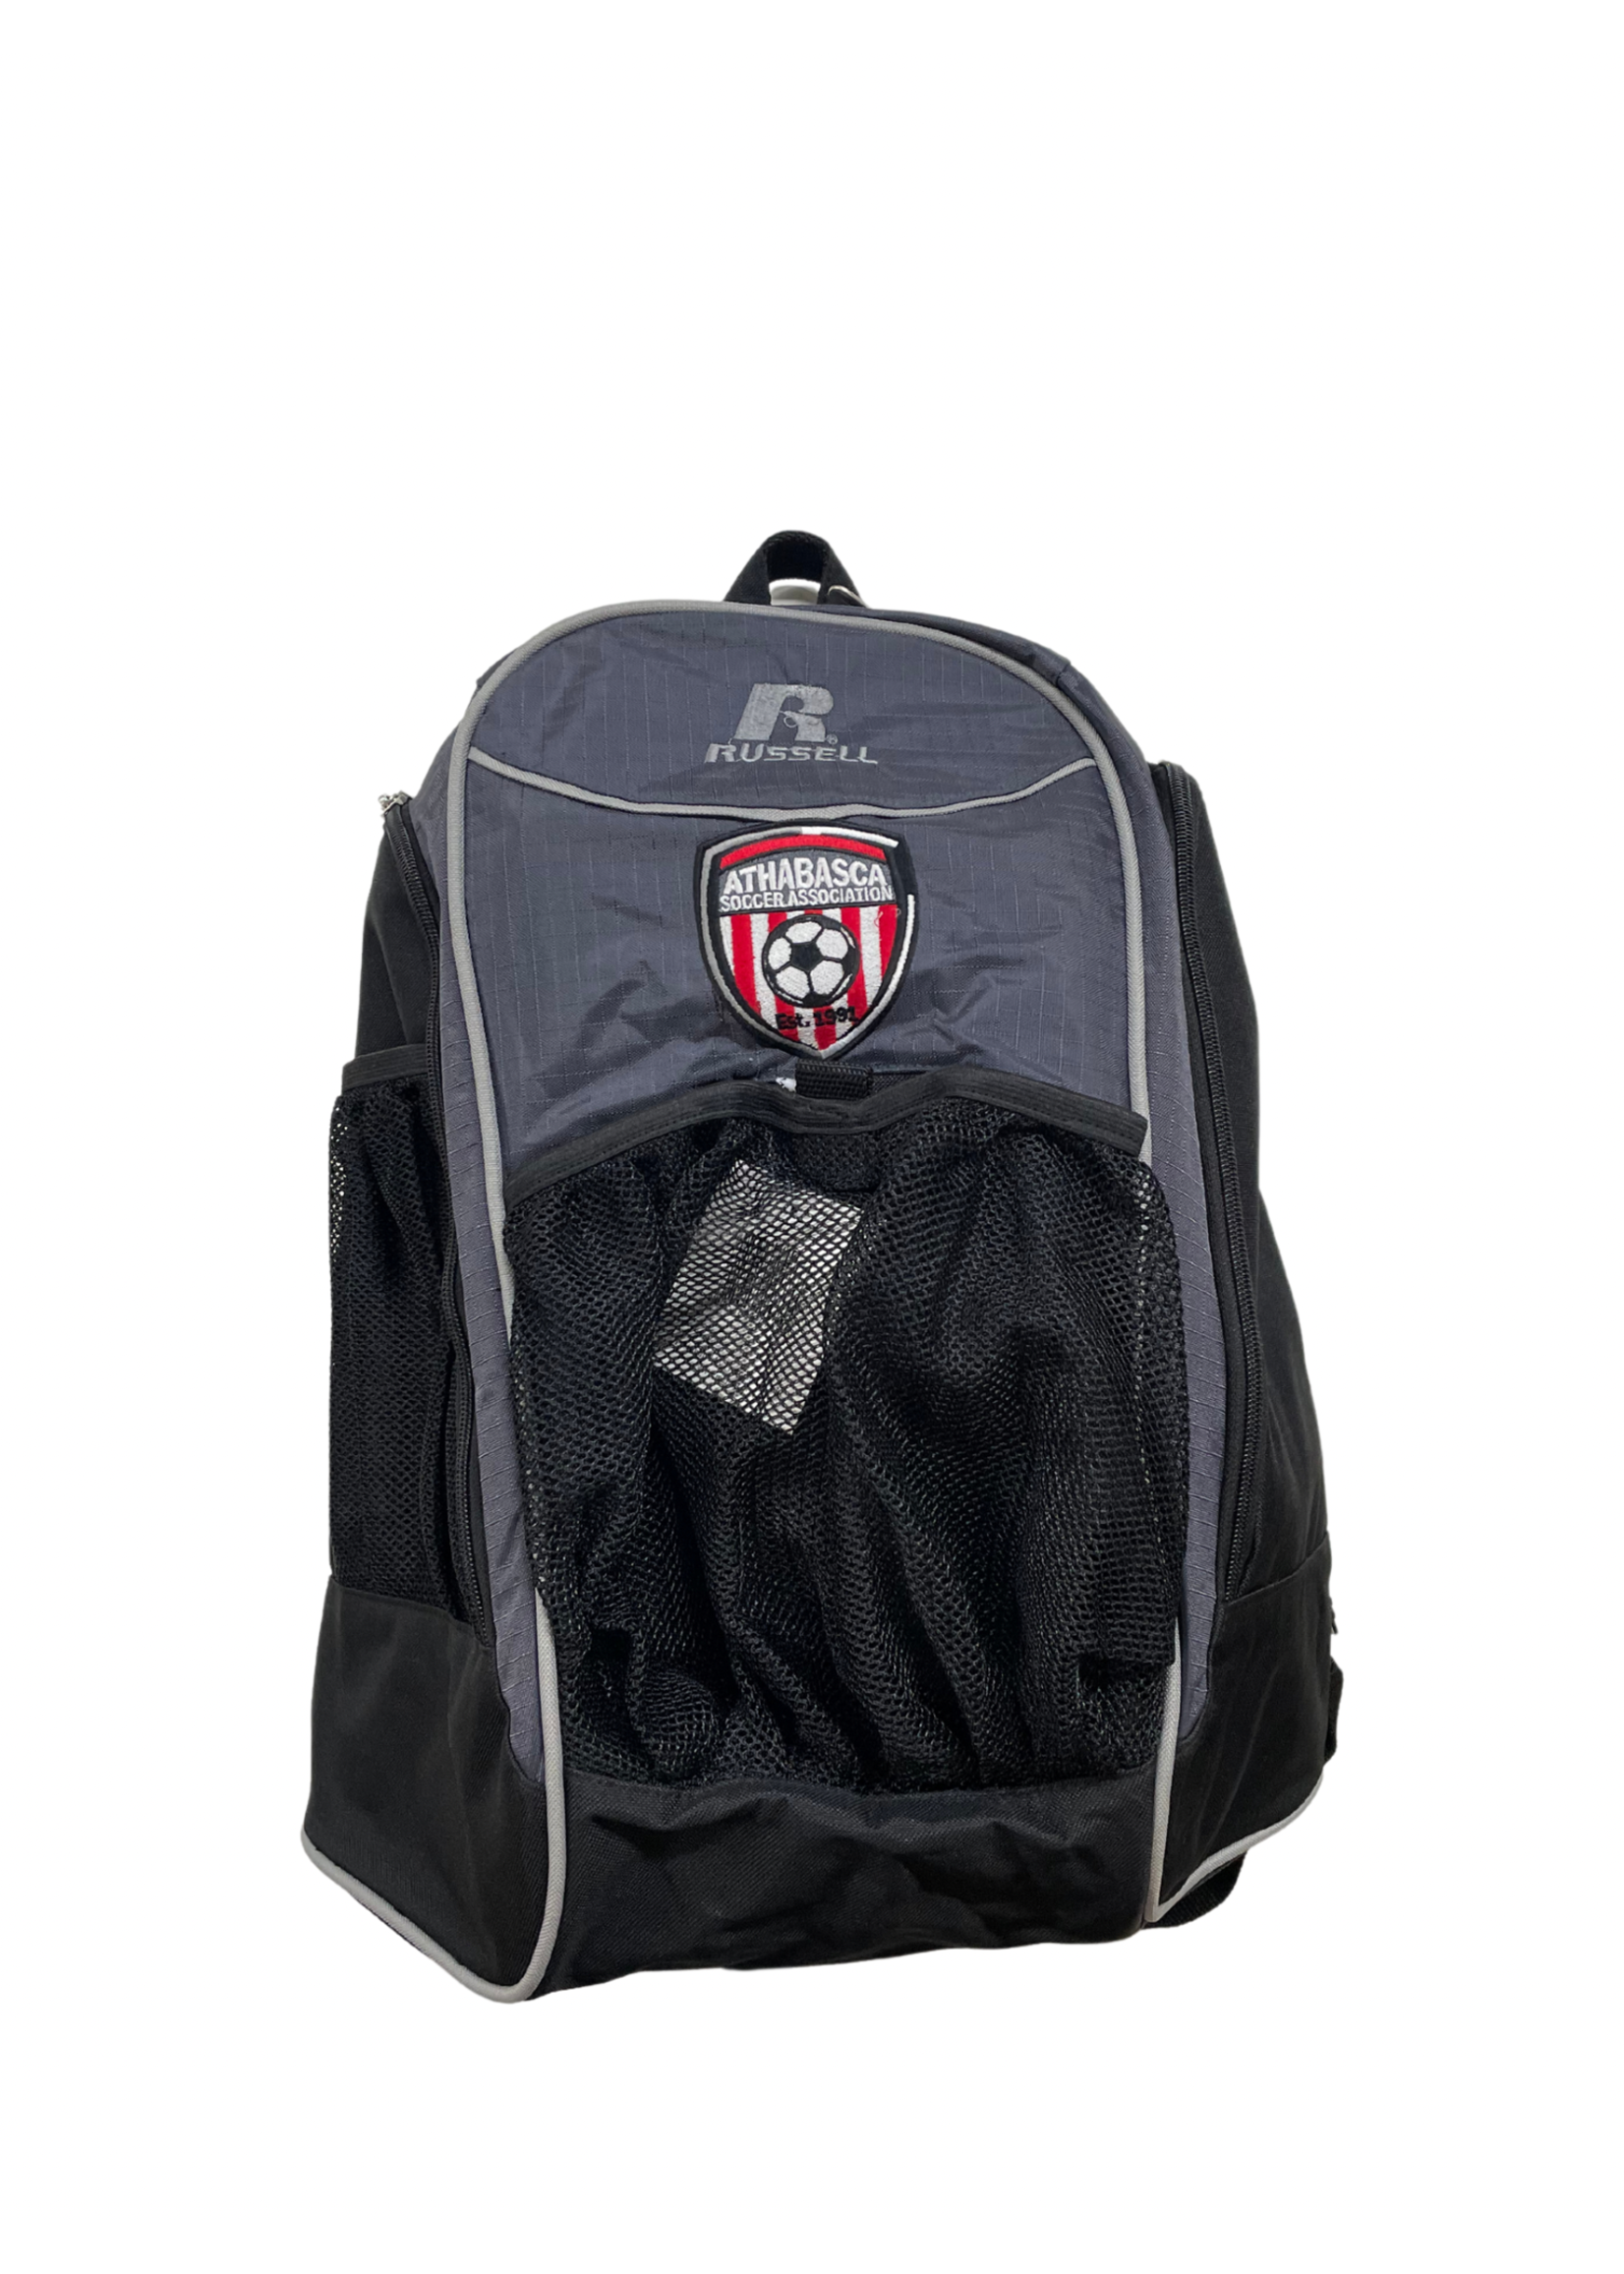 RUSSELL ATHABASCA SOCCER RUSSELL BACKPACK LOGO RED GREY